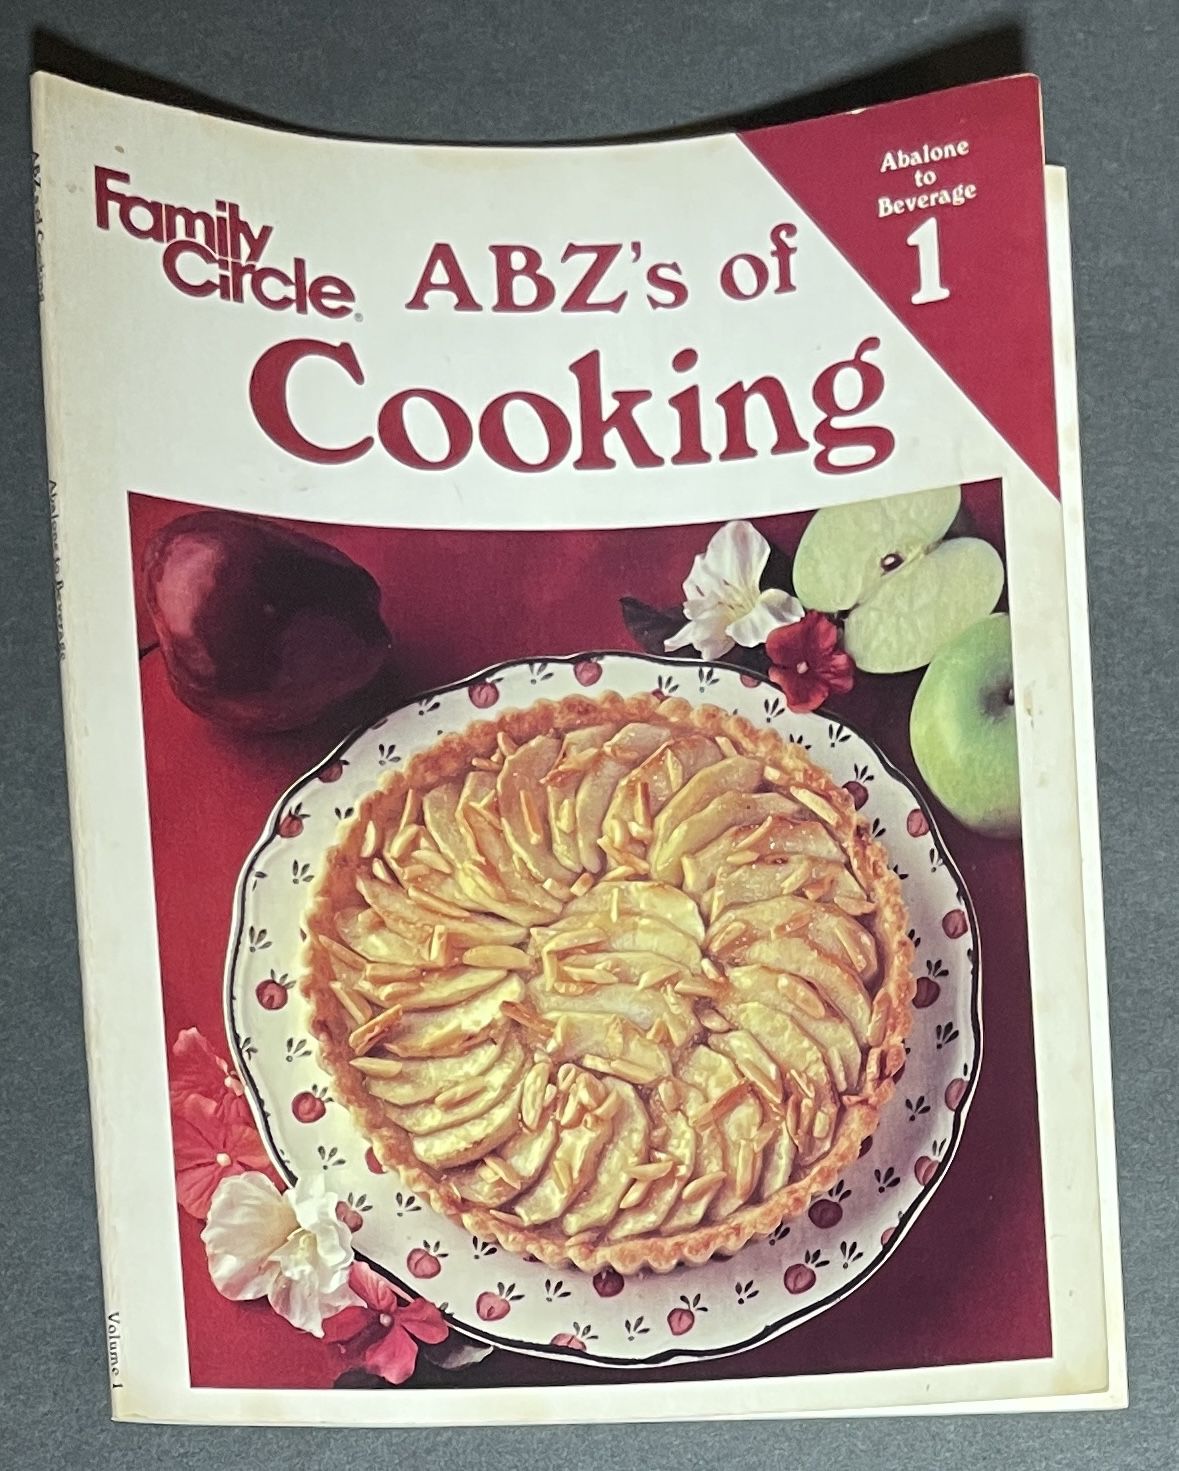 Vintage 1982 Family Circle "ABZ'S OF COOKING" Volume 1 Abalone To Beverage